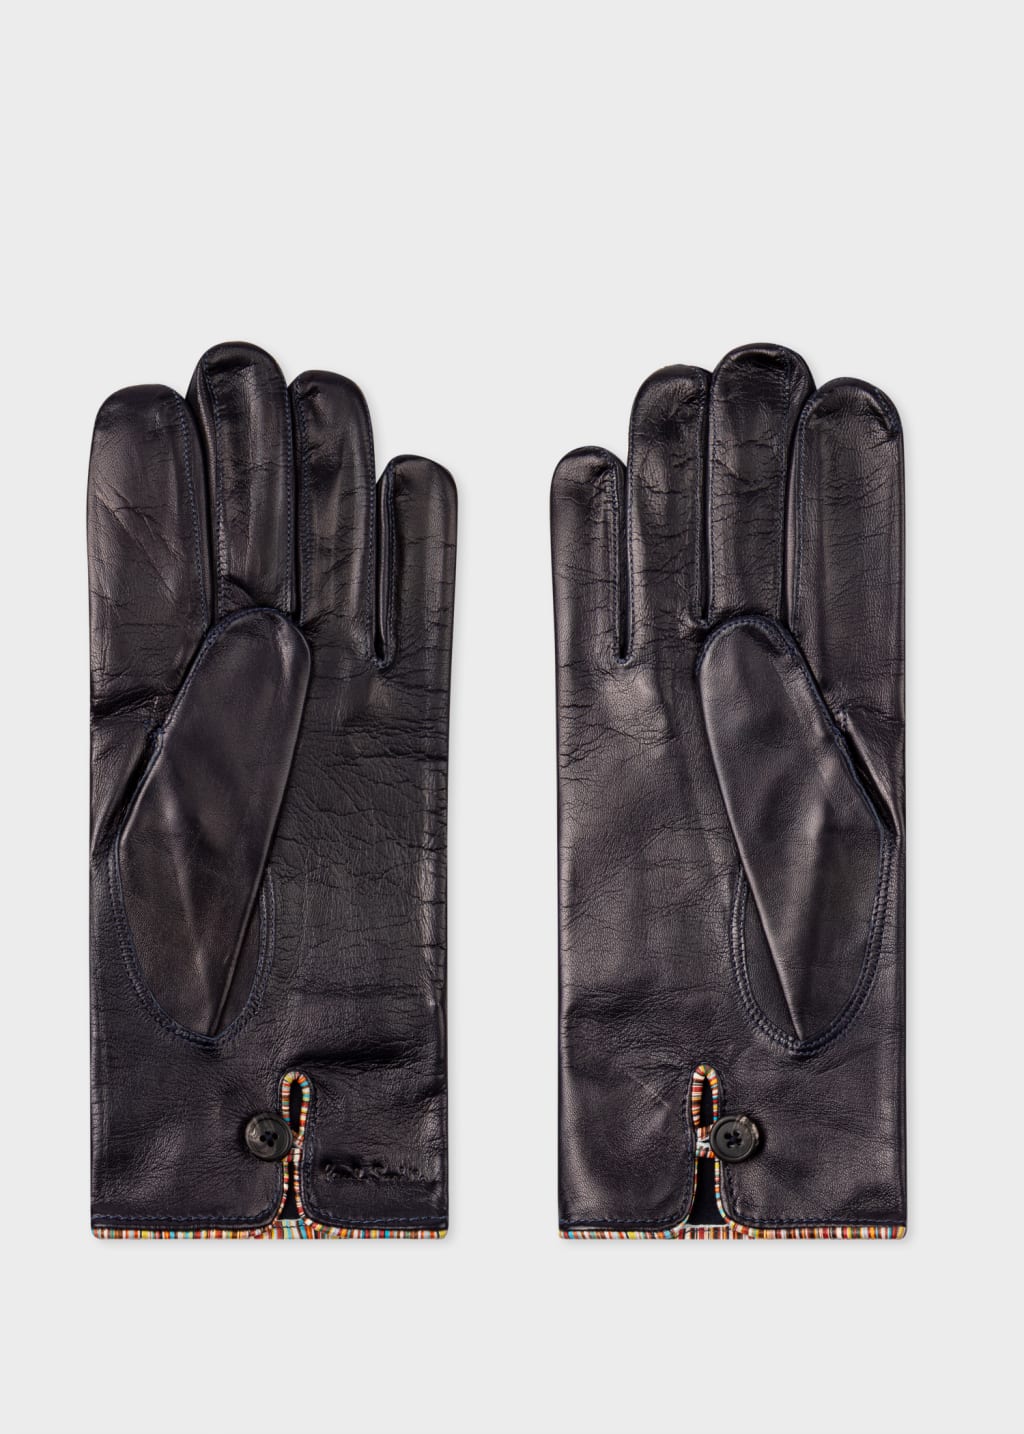 Back View - Navy Leather Gloves With 'Signature Stripe' Piping Paul Smith